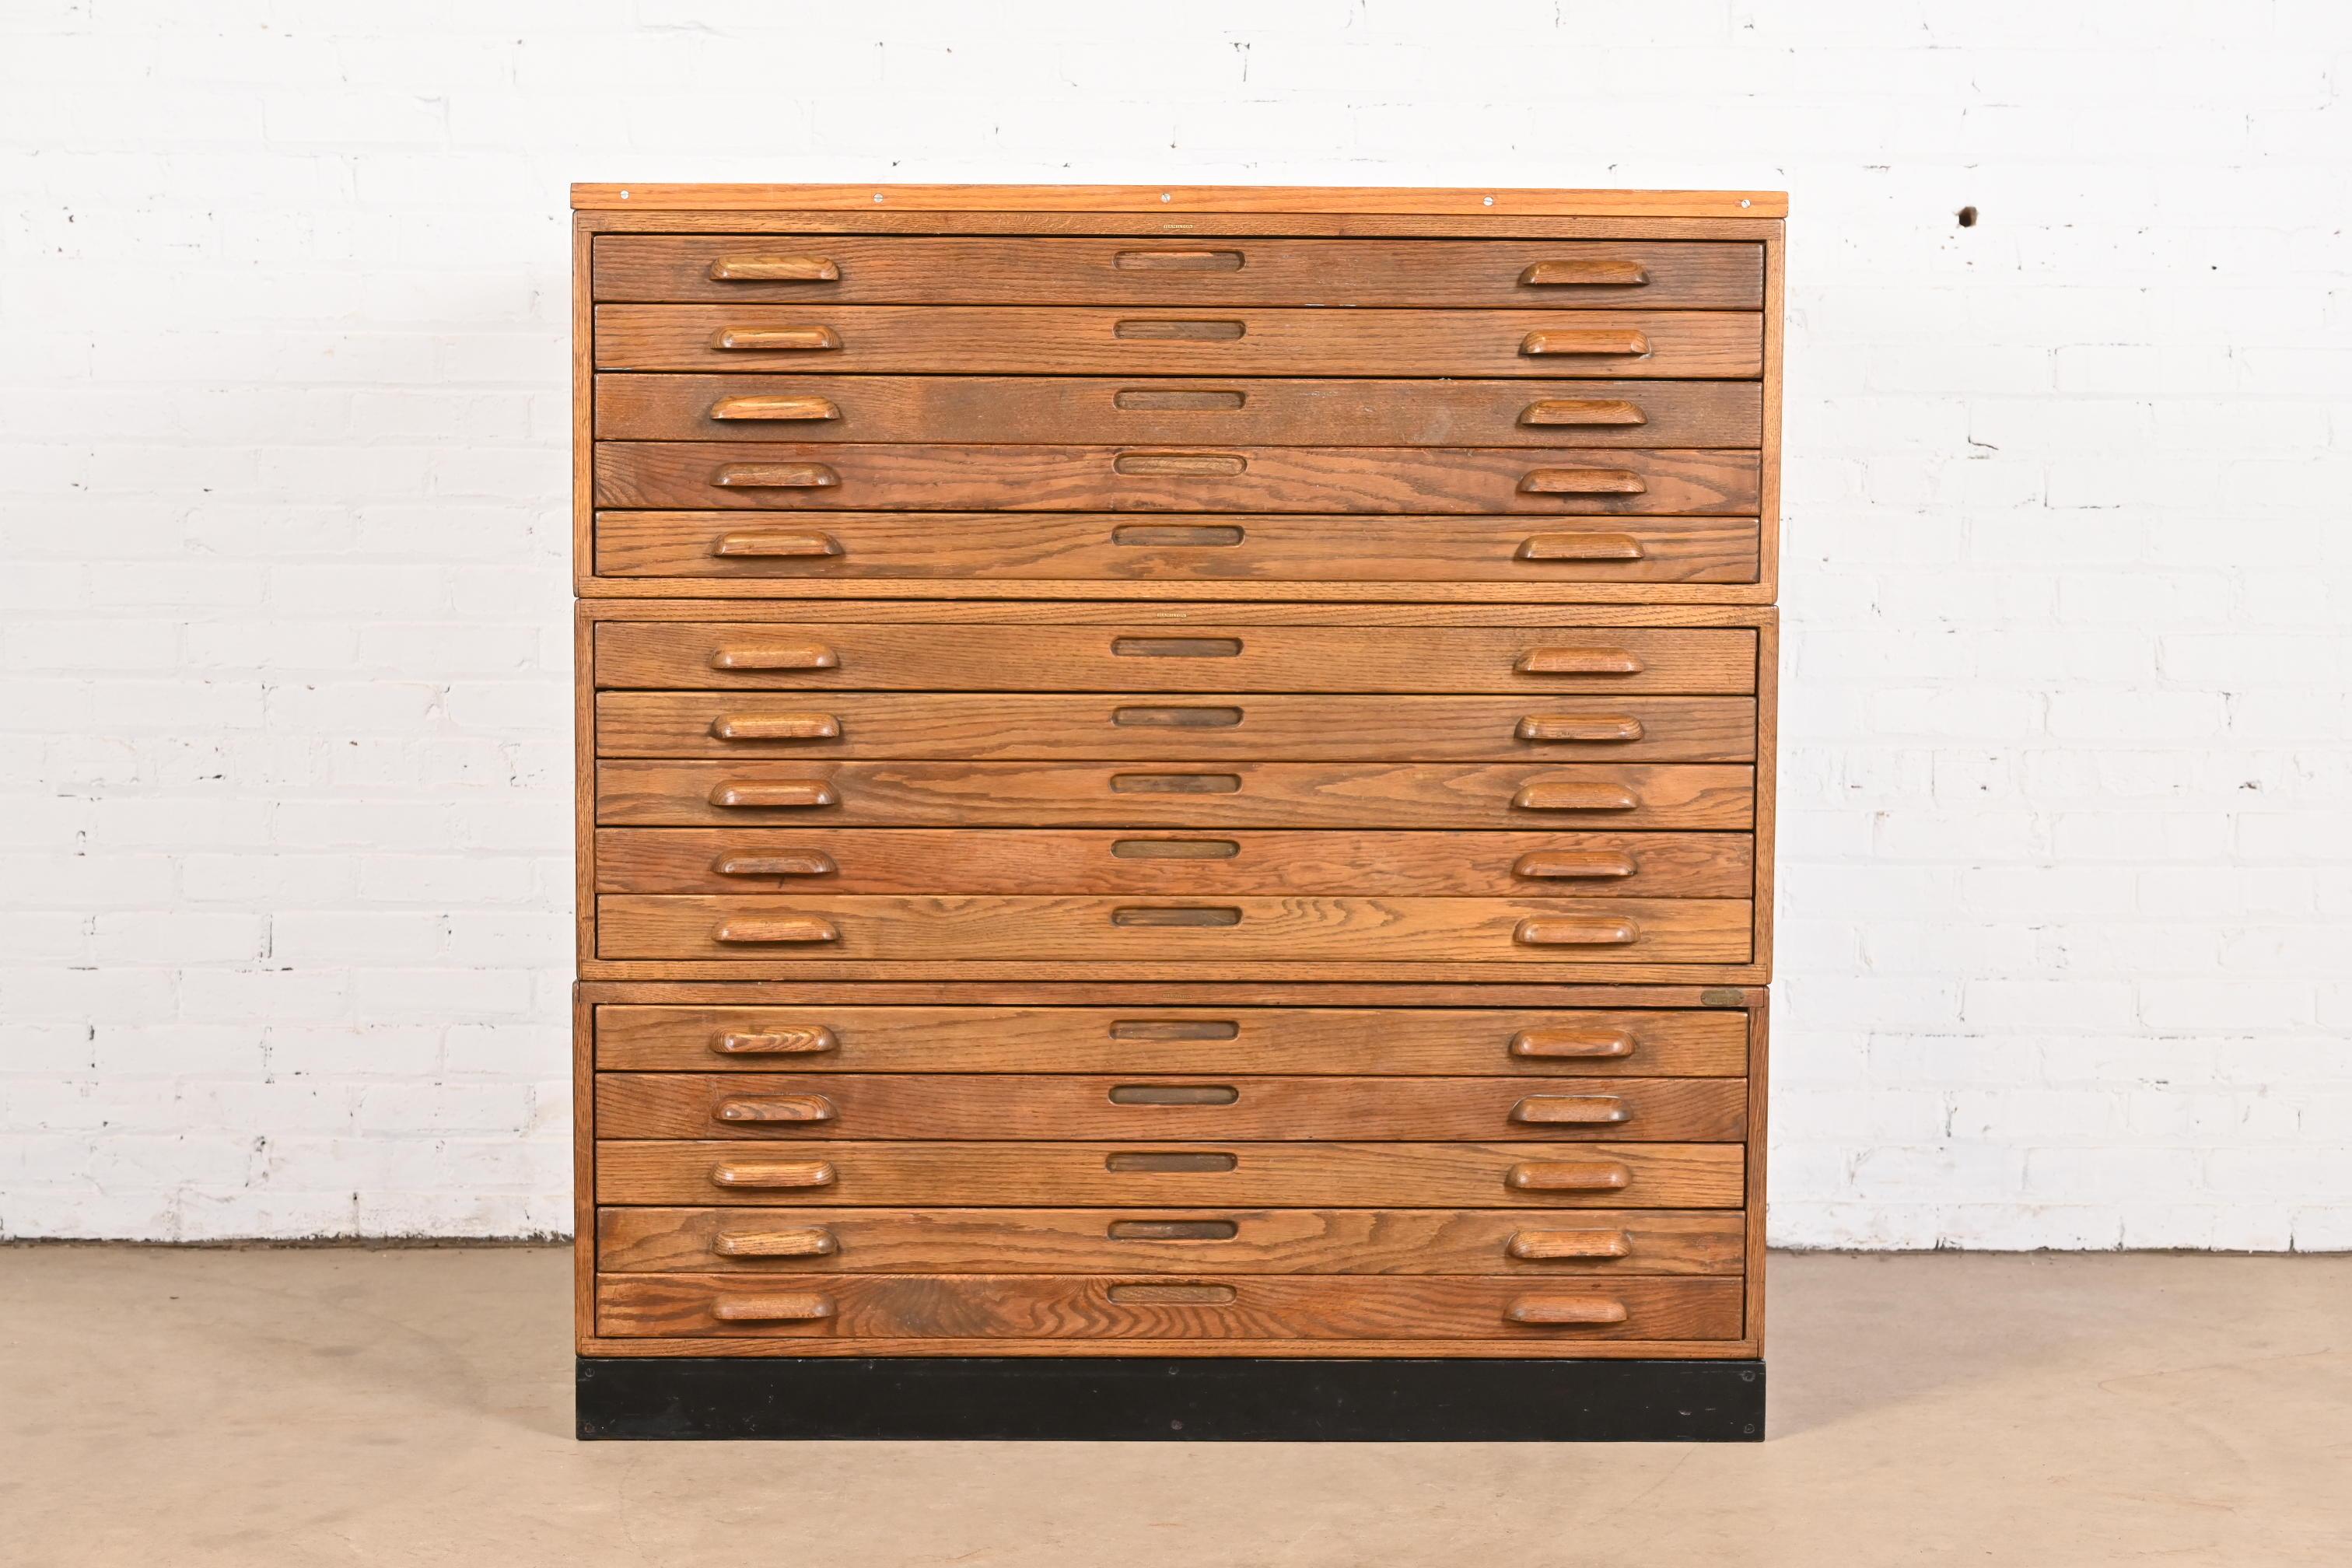 An exceptional vintage Arts & Crafts oak stacking architect's blueprint flat file cabinet

By Hamilton Manufacturing Co.

USA, Mid-20th Century

Measures: 45.5